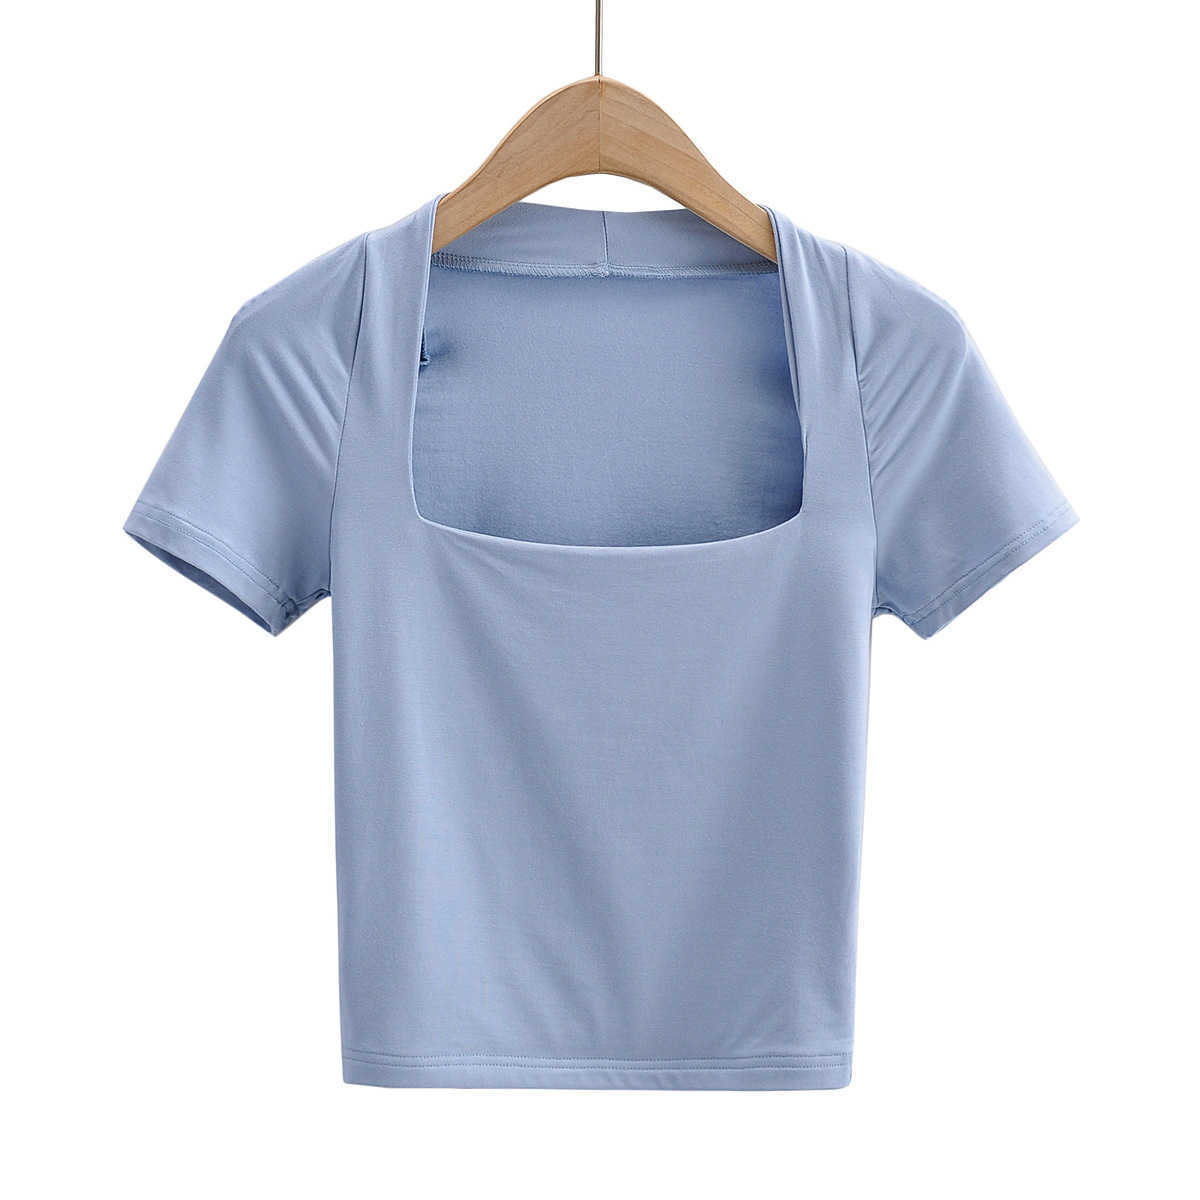 American ins low cut square neck slim exposed navel short T-shirt womens summer new elastic slim solid color short sleeve top fashion